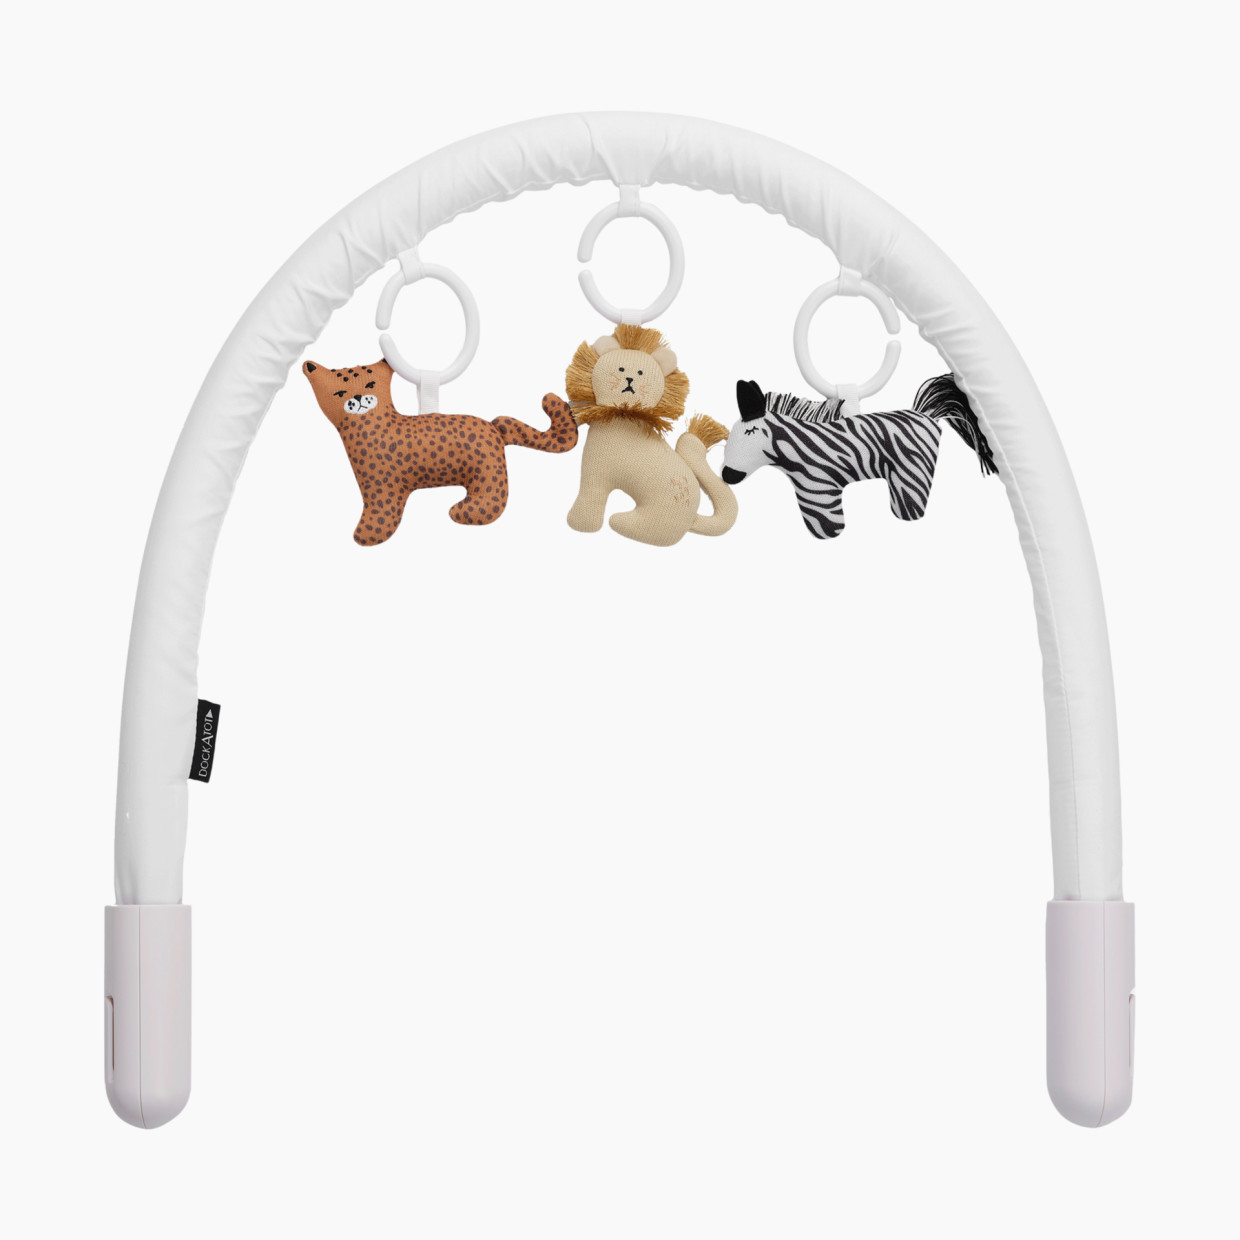 DockATot Toy Arch & Toy Bundle Set - Day At The Zoo.